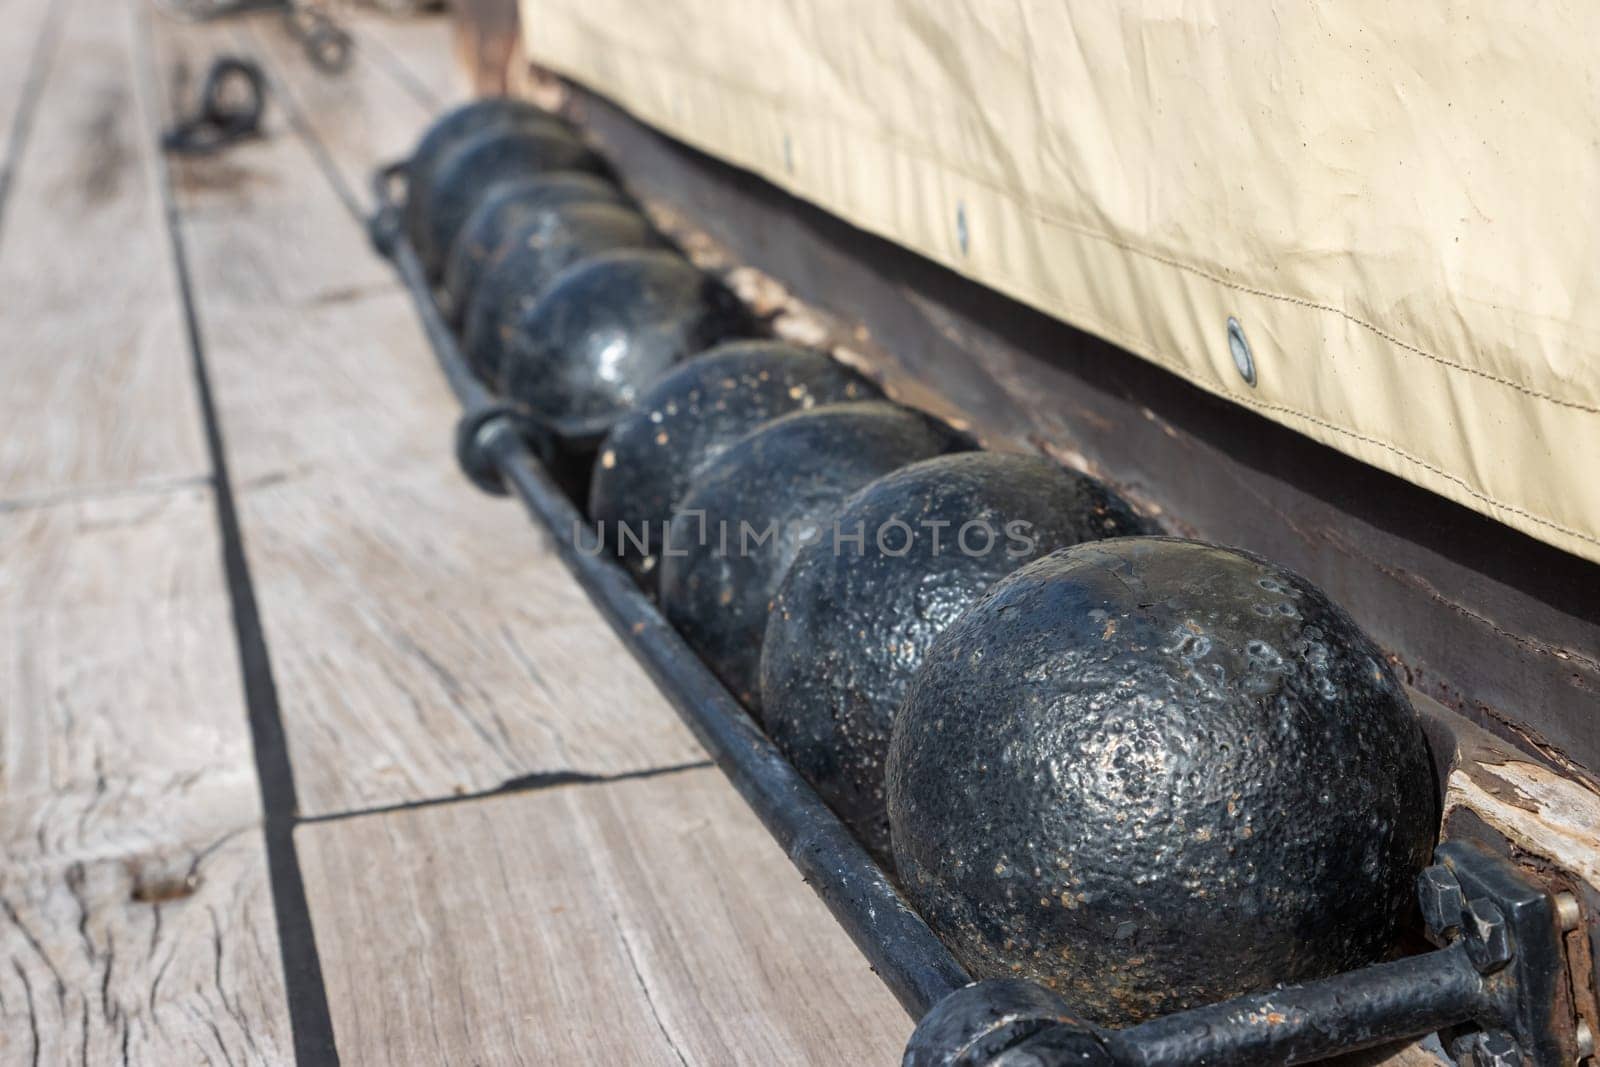 The balls cores for cannon of the 18th century on the desk of old sail battleship by Studia72